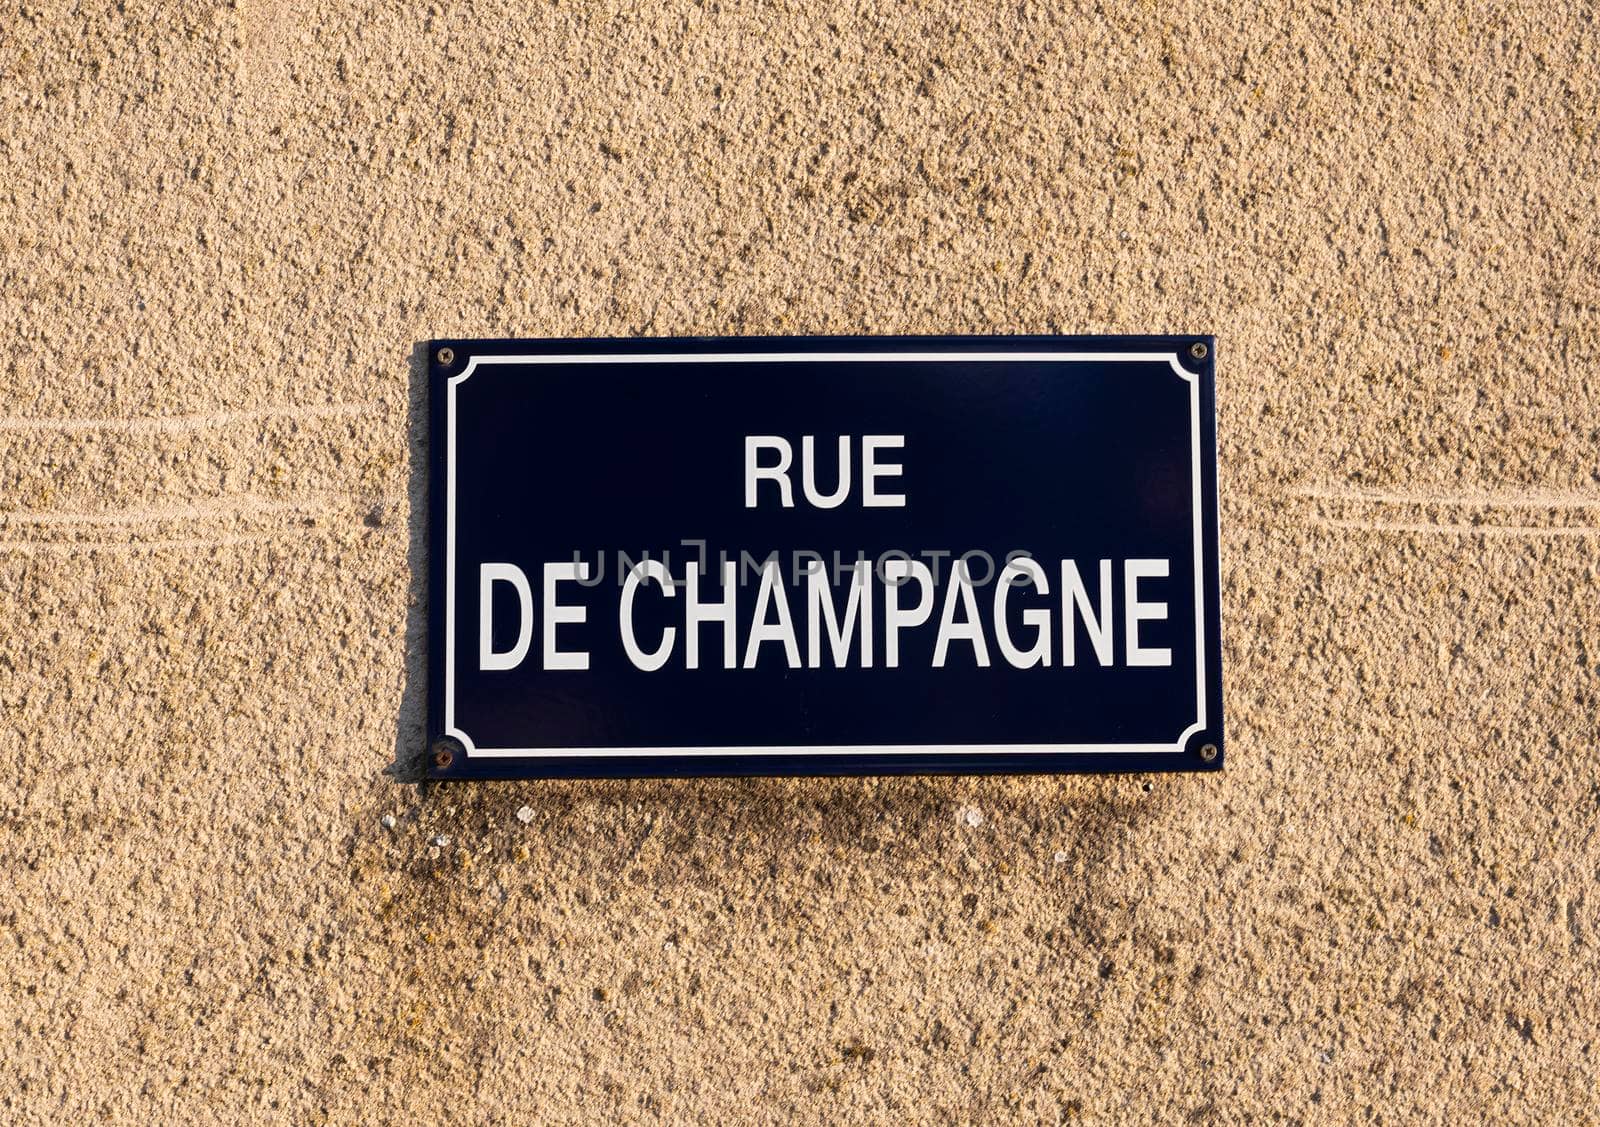 french street sign in region of champagne by ahavelaar